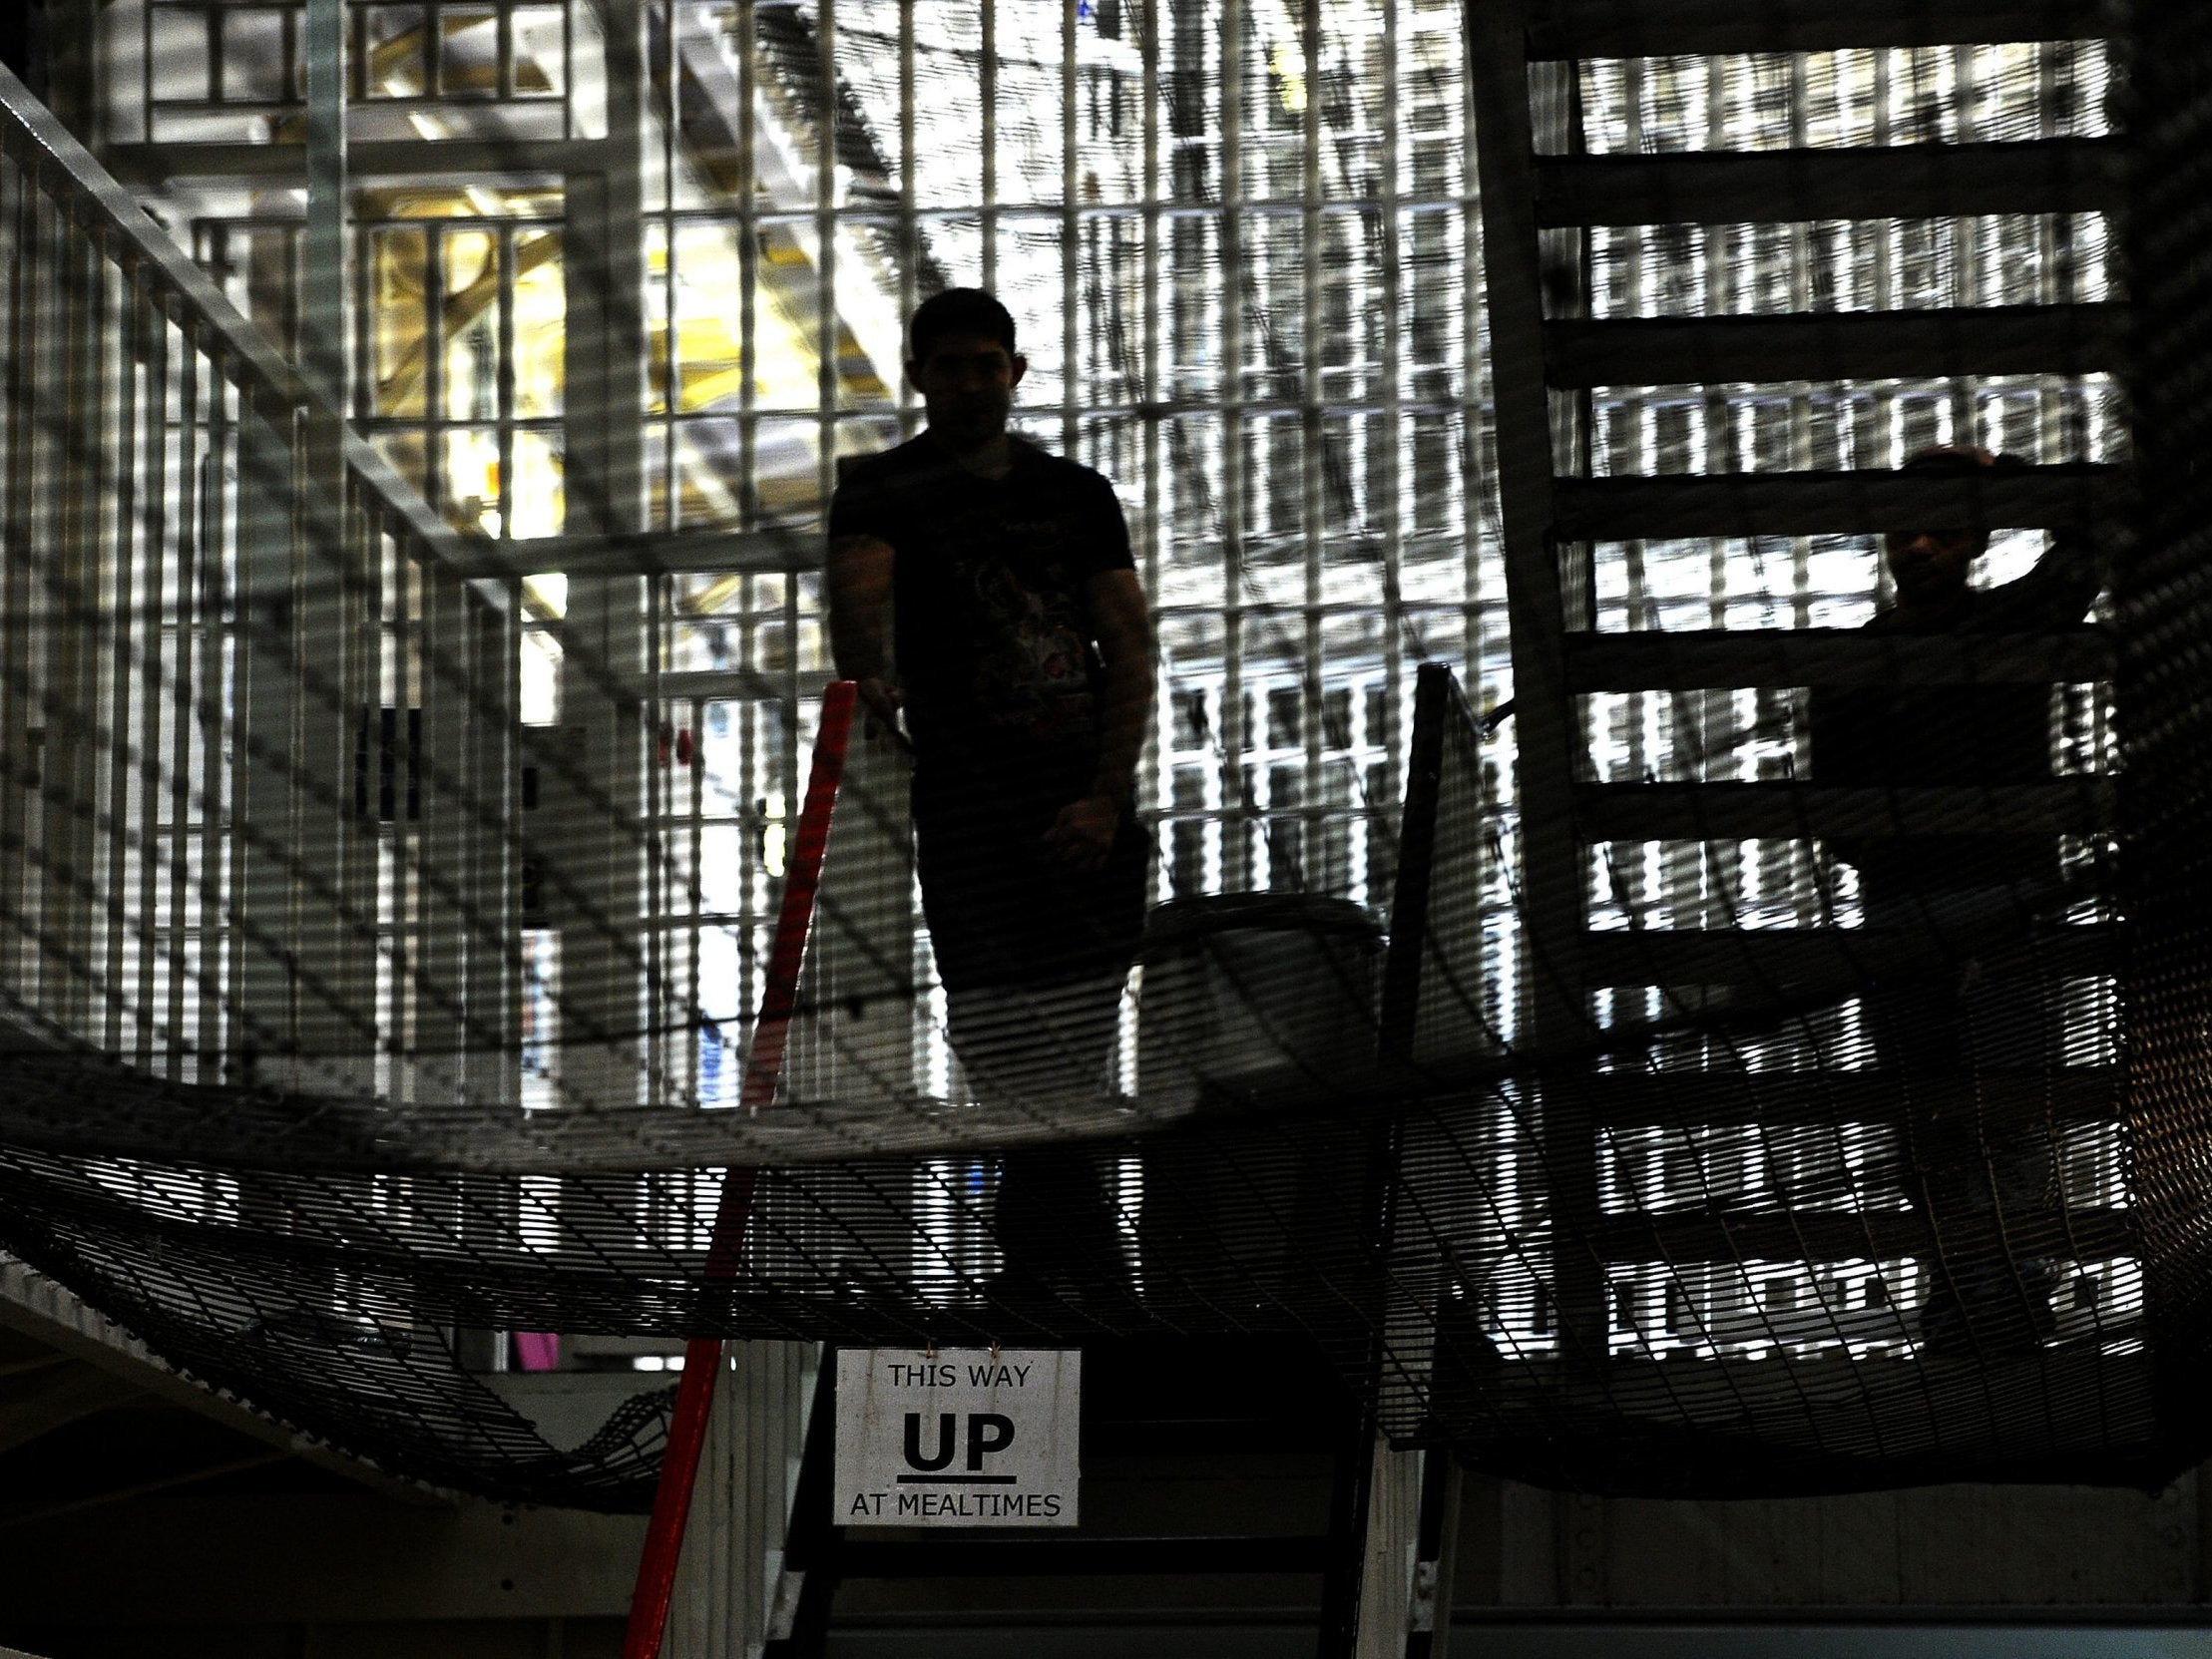 Change sentencing policy to better tackle drug use in jails, says think tank Reform